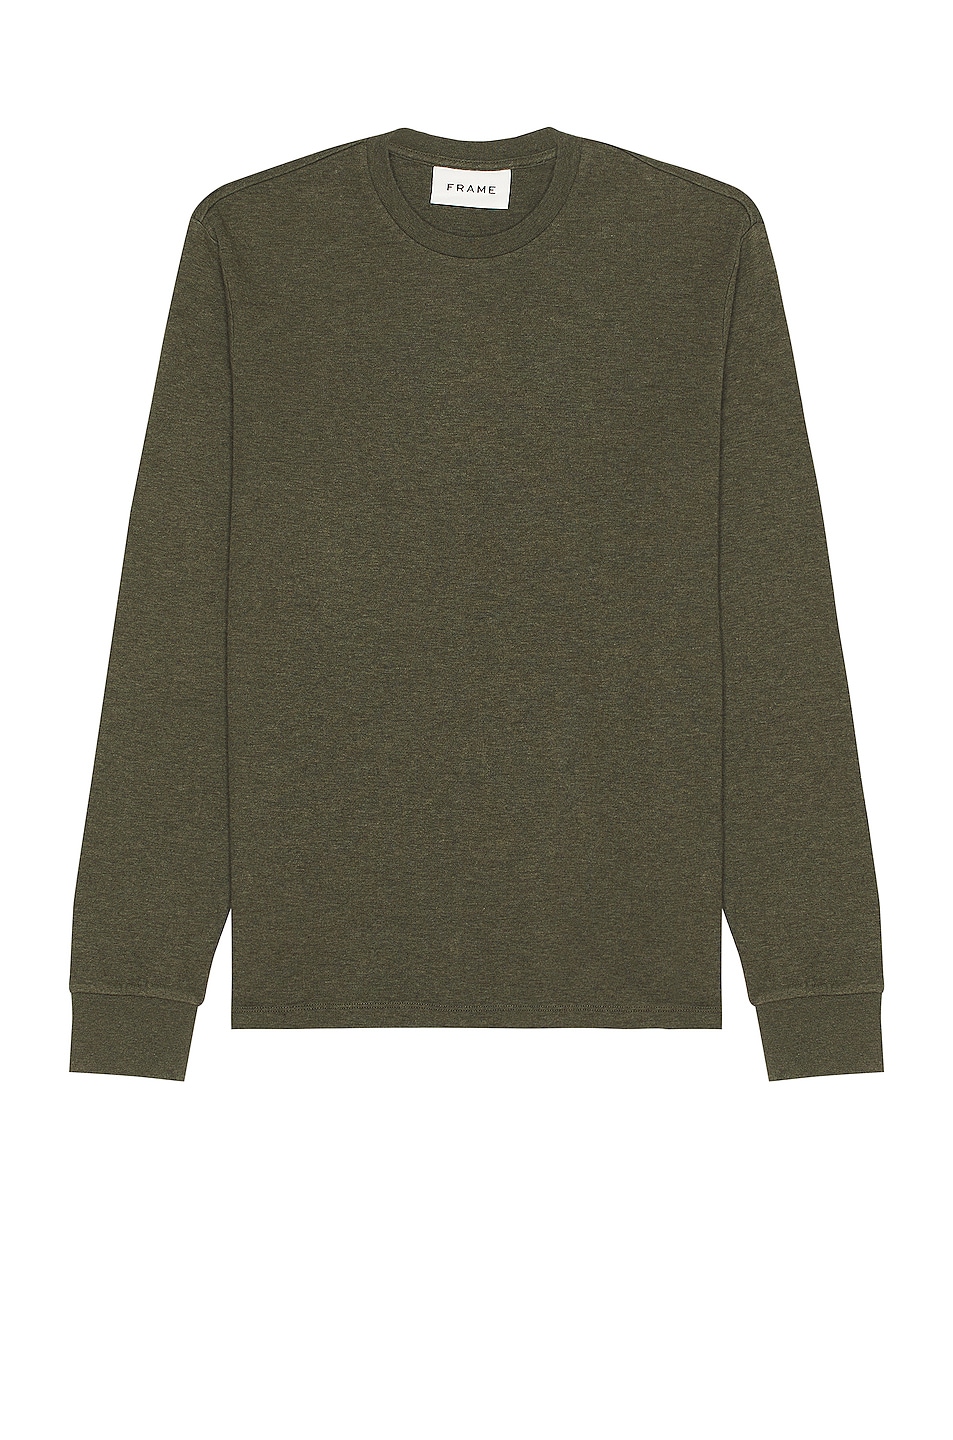 Image 1 of FRAME Duo Fold Tee in Heather Olive Green